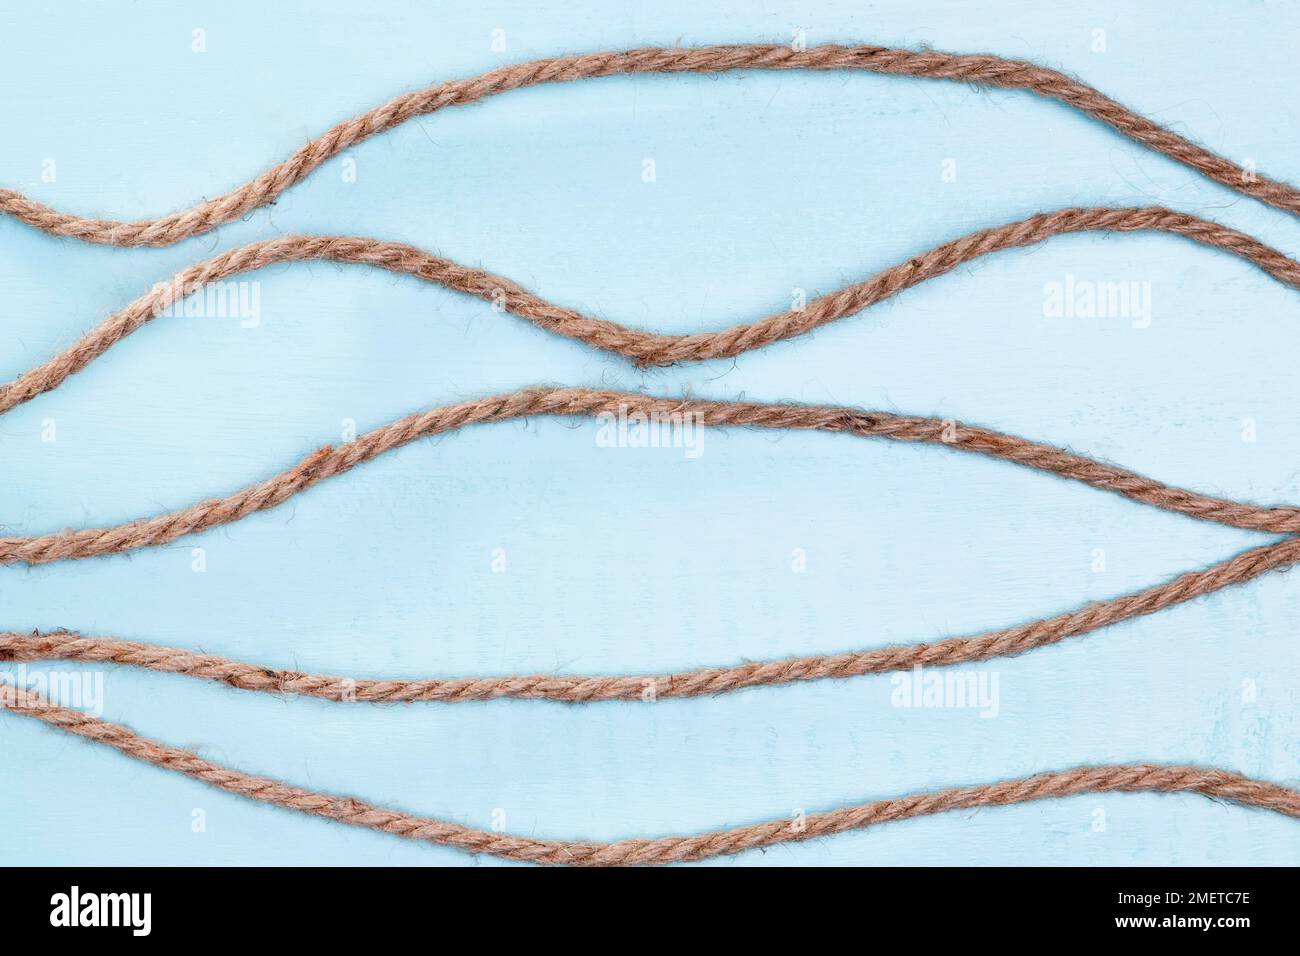 twine strong beige rope horizontal lines Stock Photo